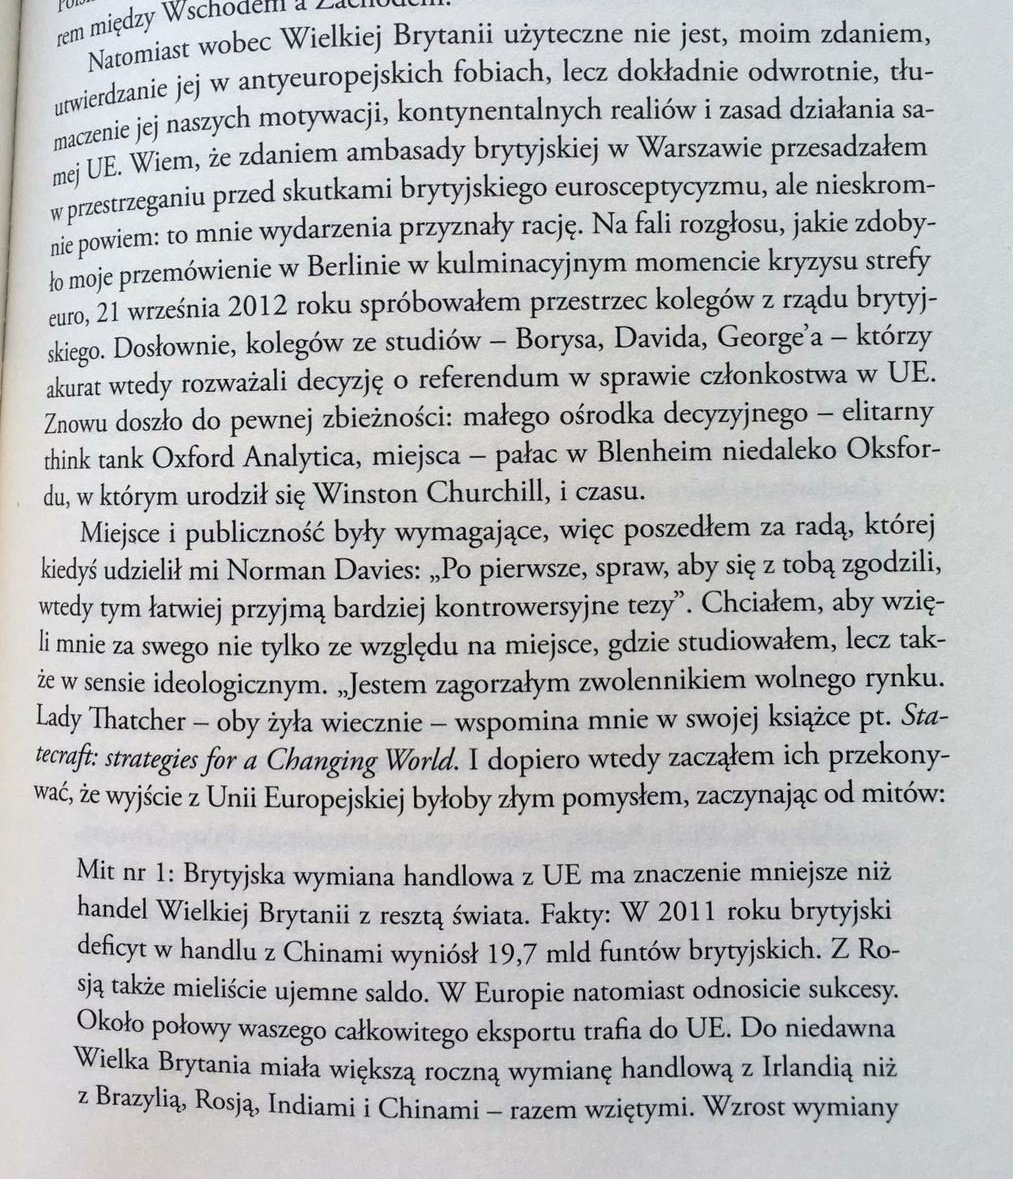 Sikorski says that back then British Embassy in Warsaw thought we was overstating the strength of British Euroscepticism, but 'history proved me right'.He also talks how he tried to warn Cameron, Johnson and Osborne - all of whom he knew from Oxford - against Brexit.[9/17]